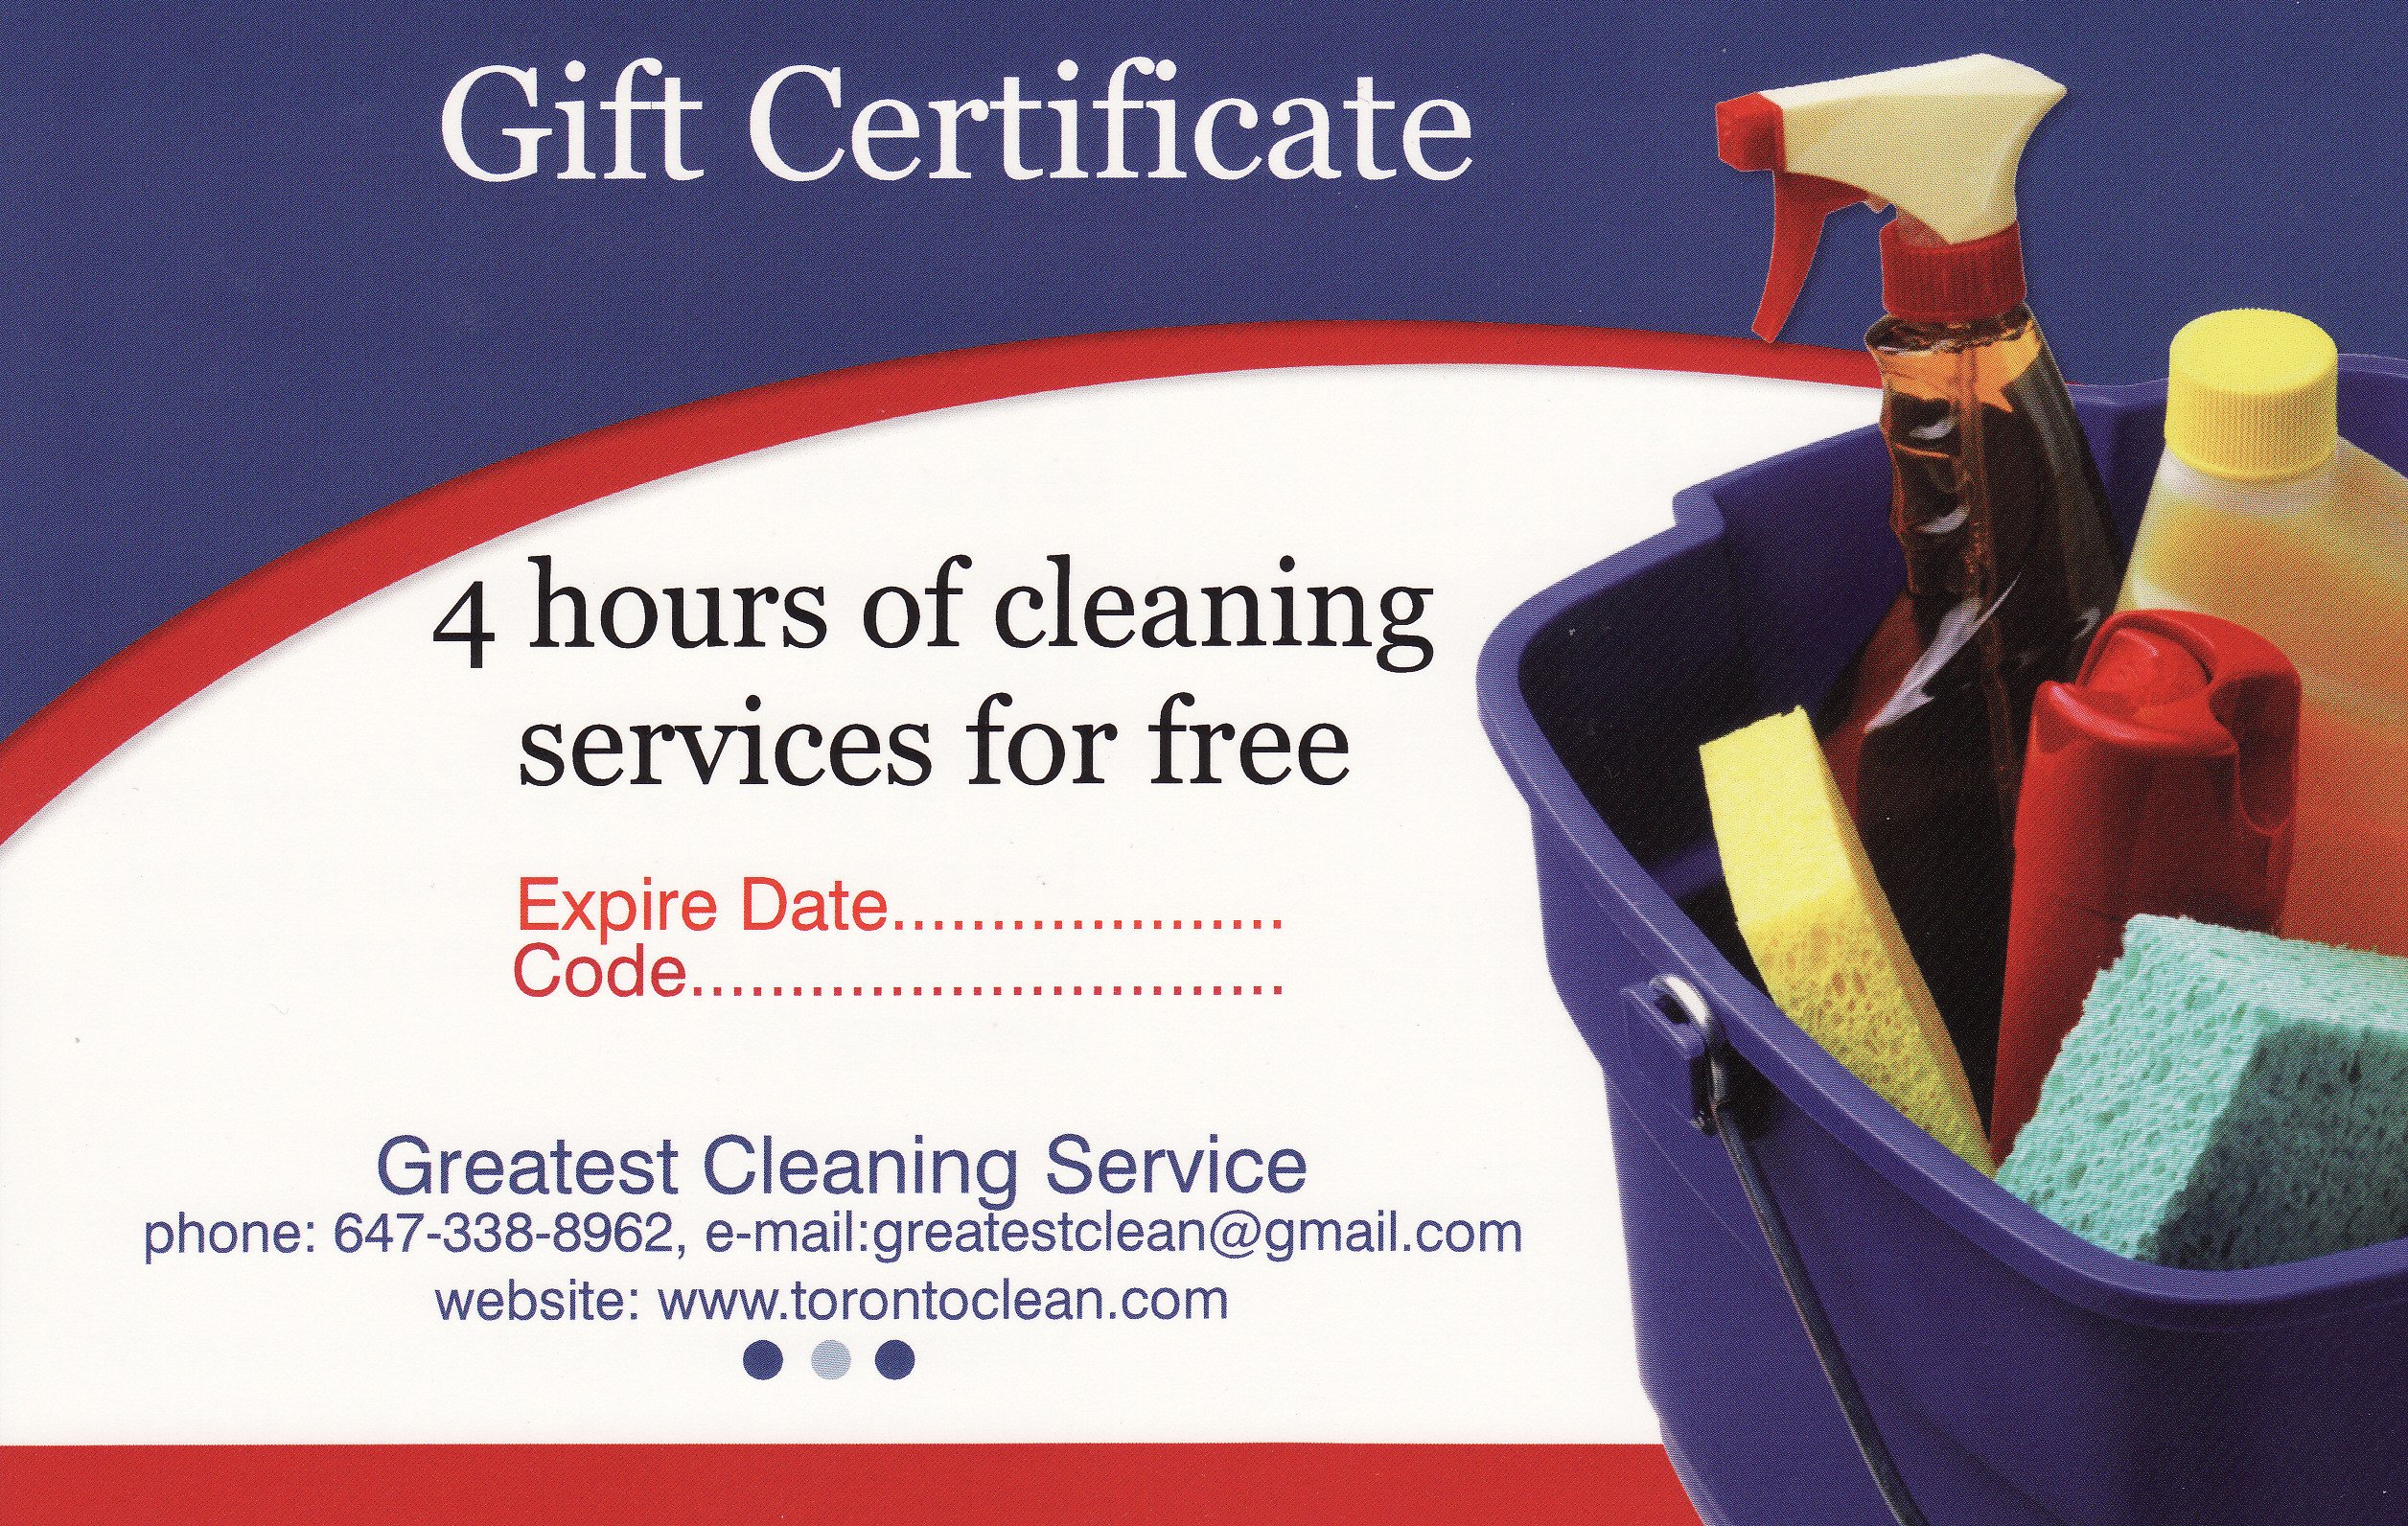 Carpet Cleaning Gift Certificate Template Cleaning Gift Certificate toronto Maid Services Gift